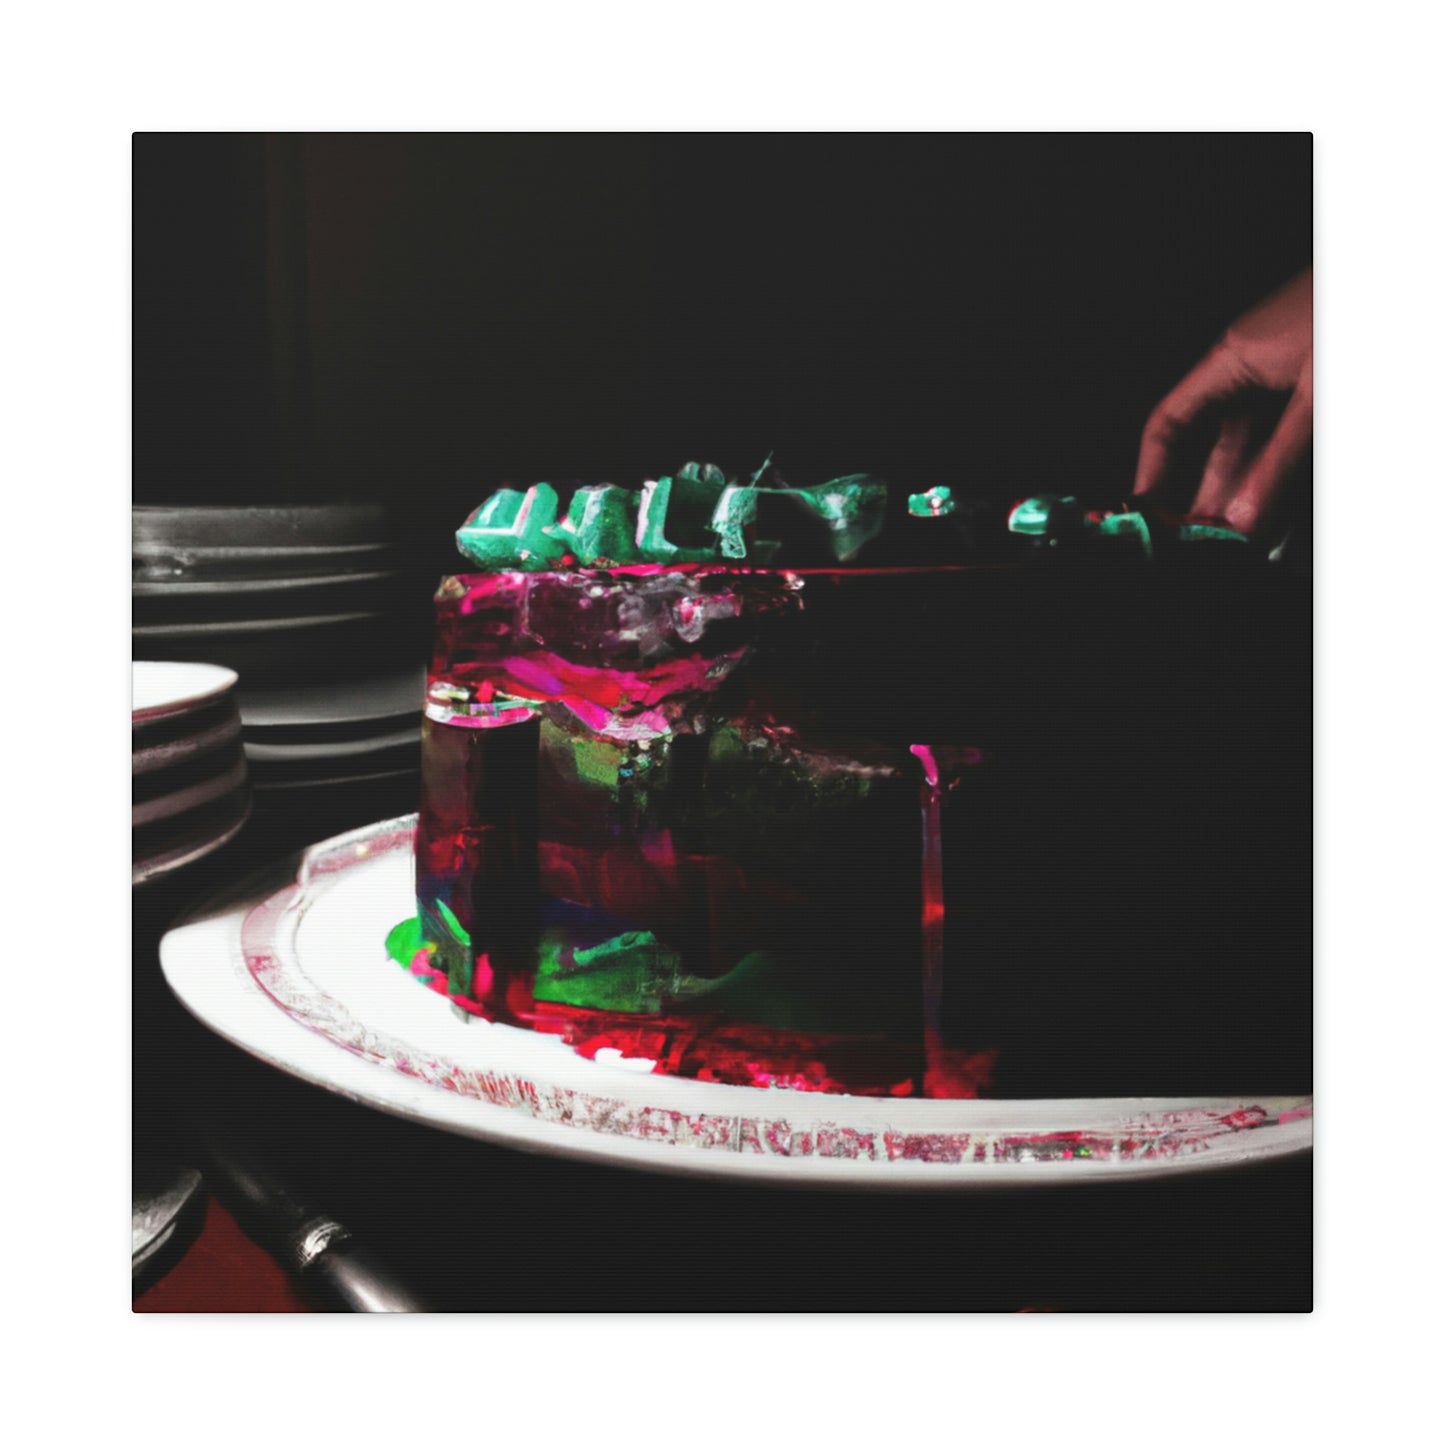 Mysterious Cake Creation - The Alien Canva